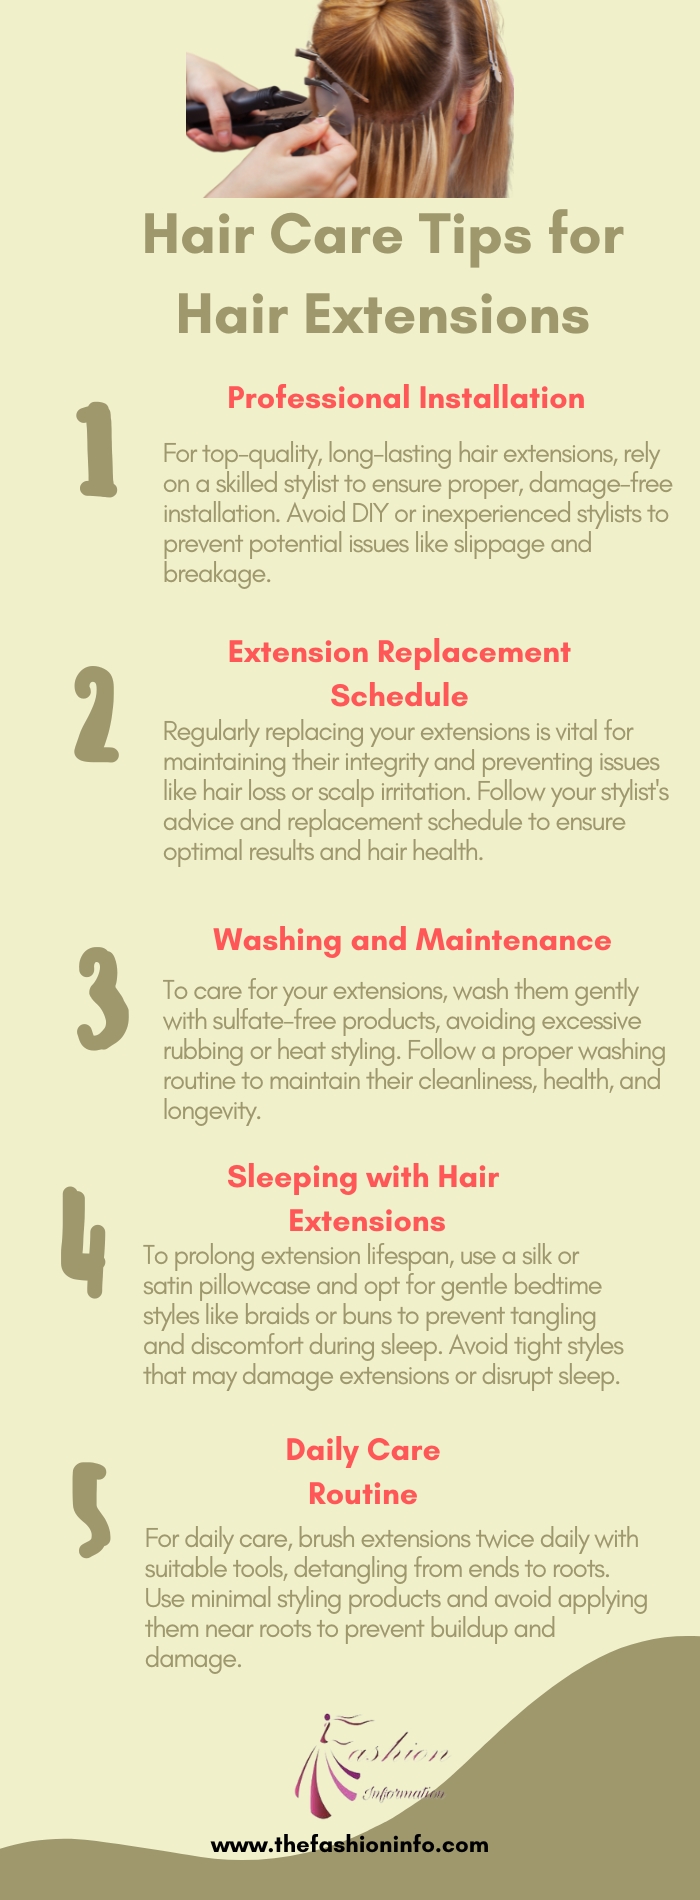 Hair Care Tips for Hair Extensions